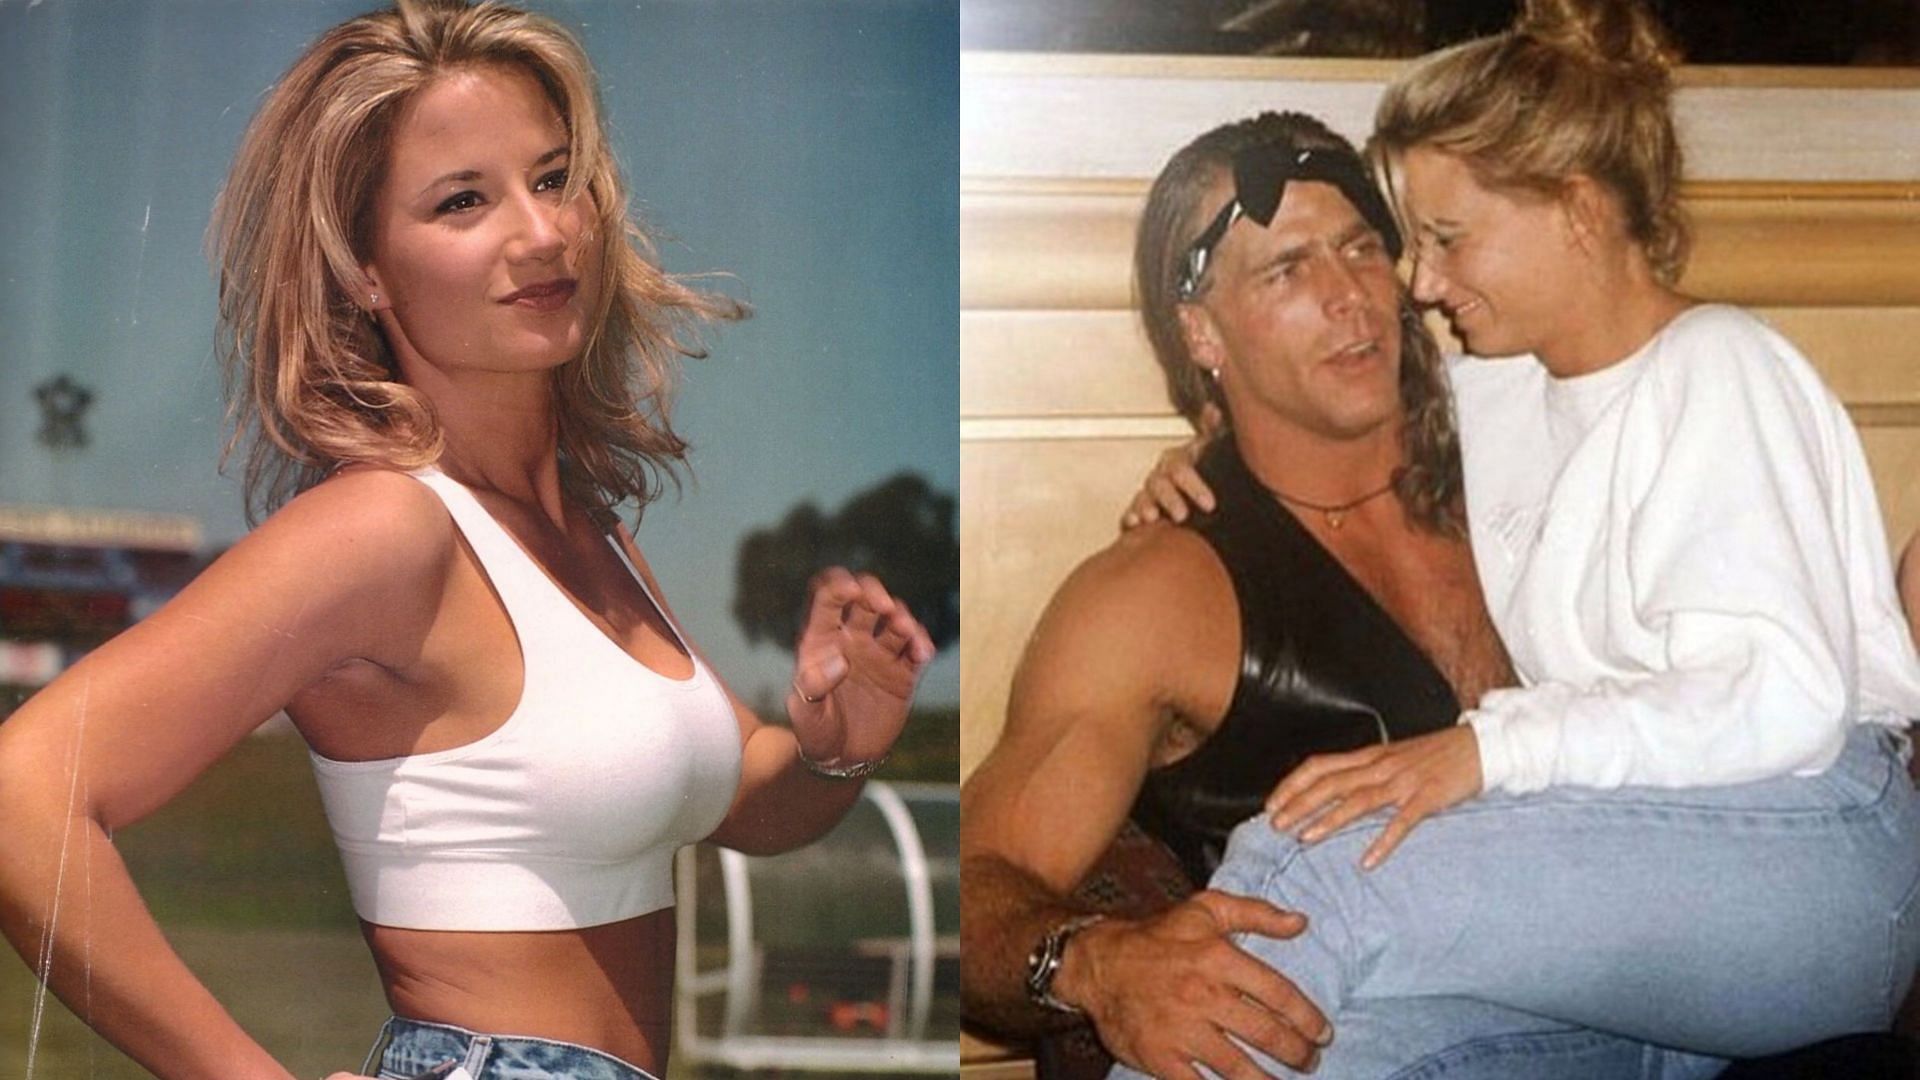 Sunny dated WWE Hall of Famer Shawn Michaels for several months